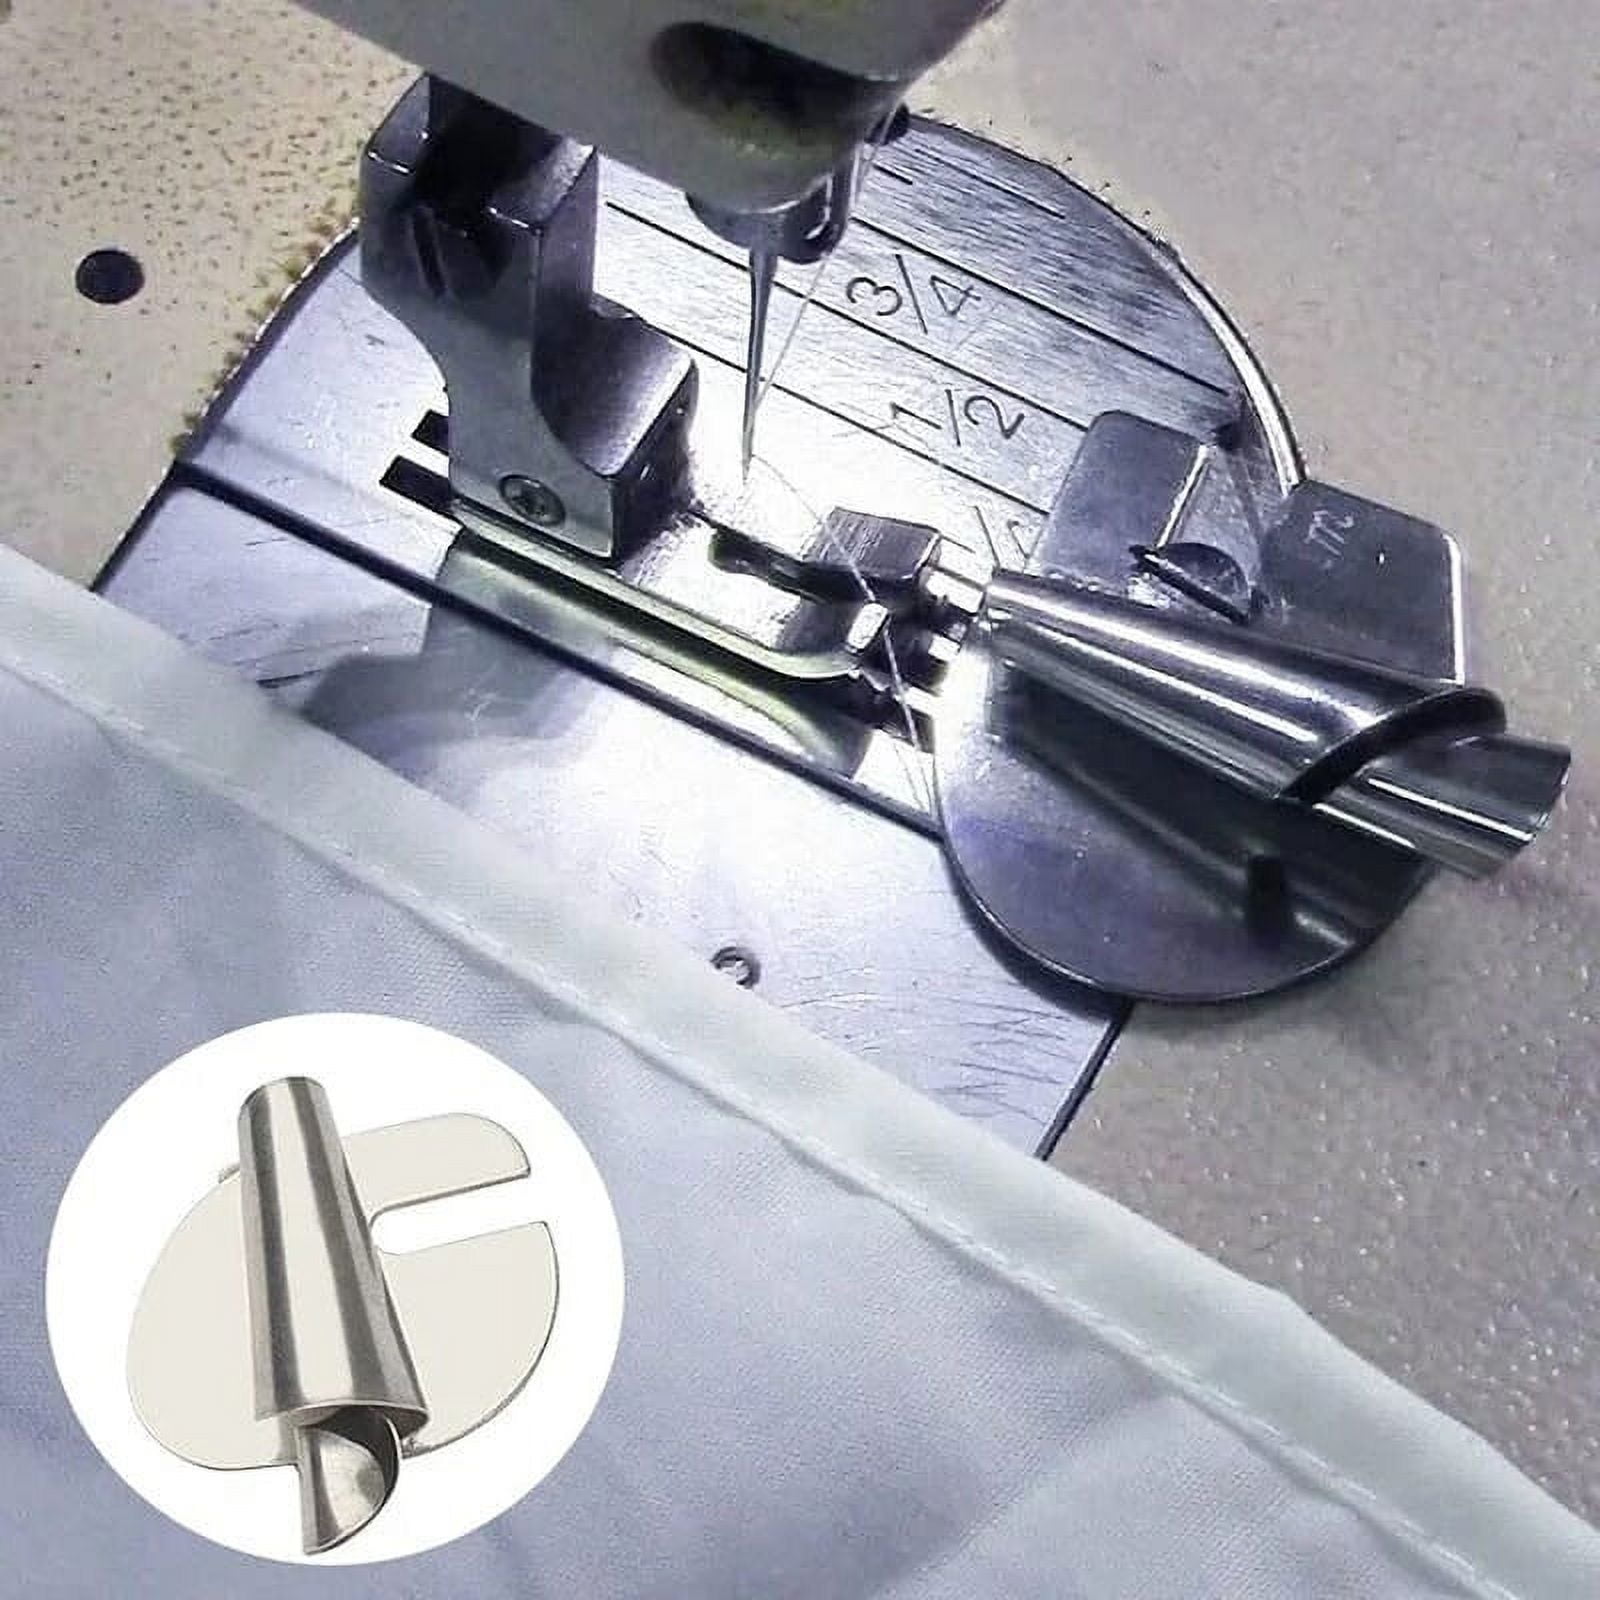 Universal Sewing Rolled Hemmer Foot Set,Rolled Hem Foot for Sewing  Machine,3mm-10mm 8PCS Wide Rolled Hem Presser Foot Set,Industrial Curved  Scroll